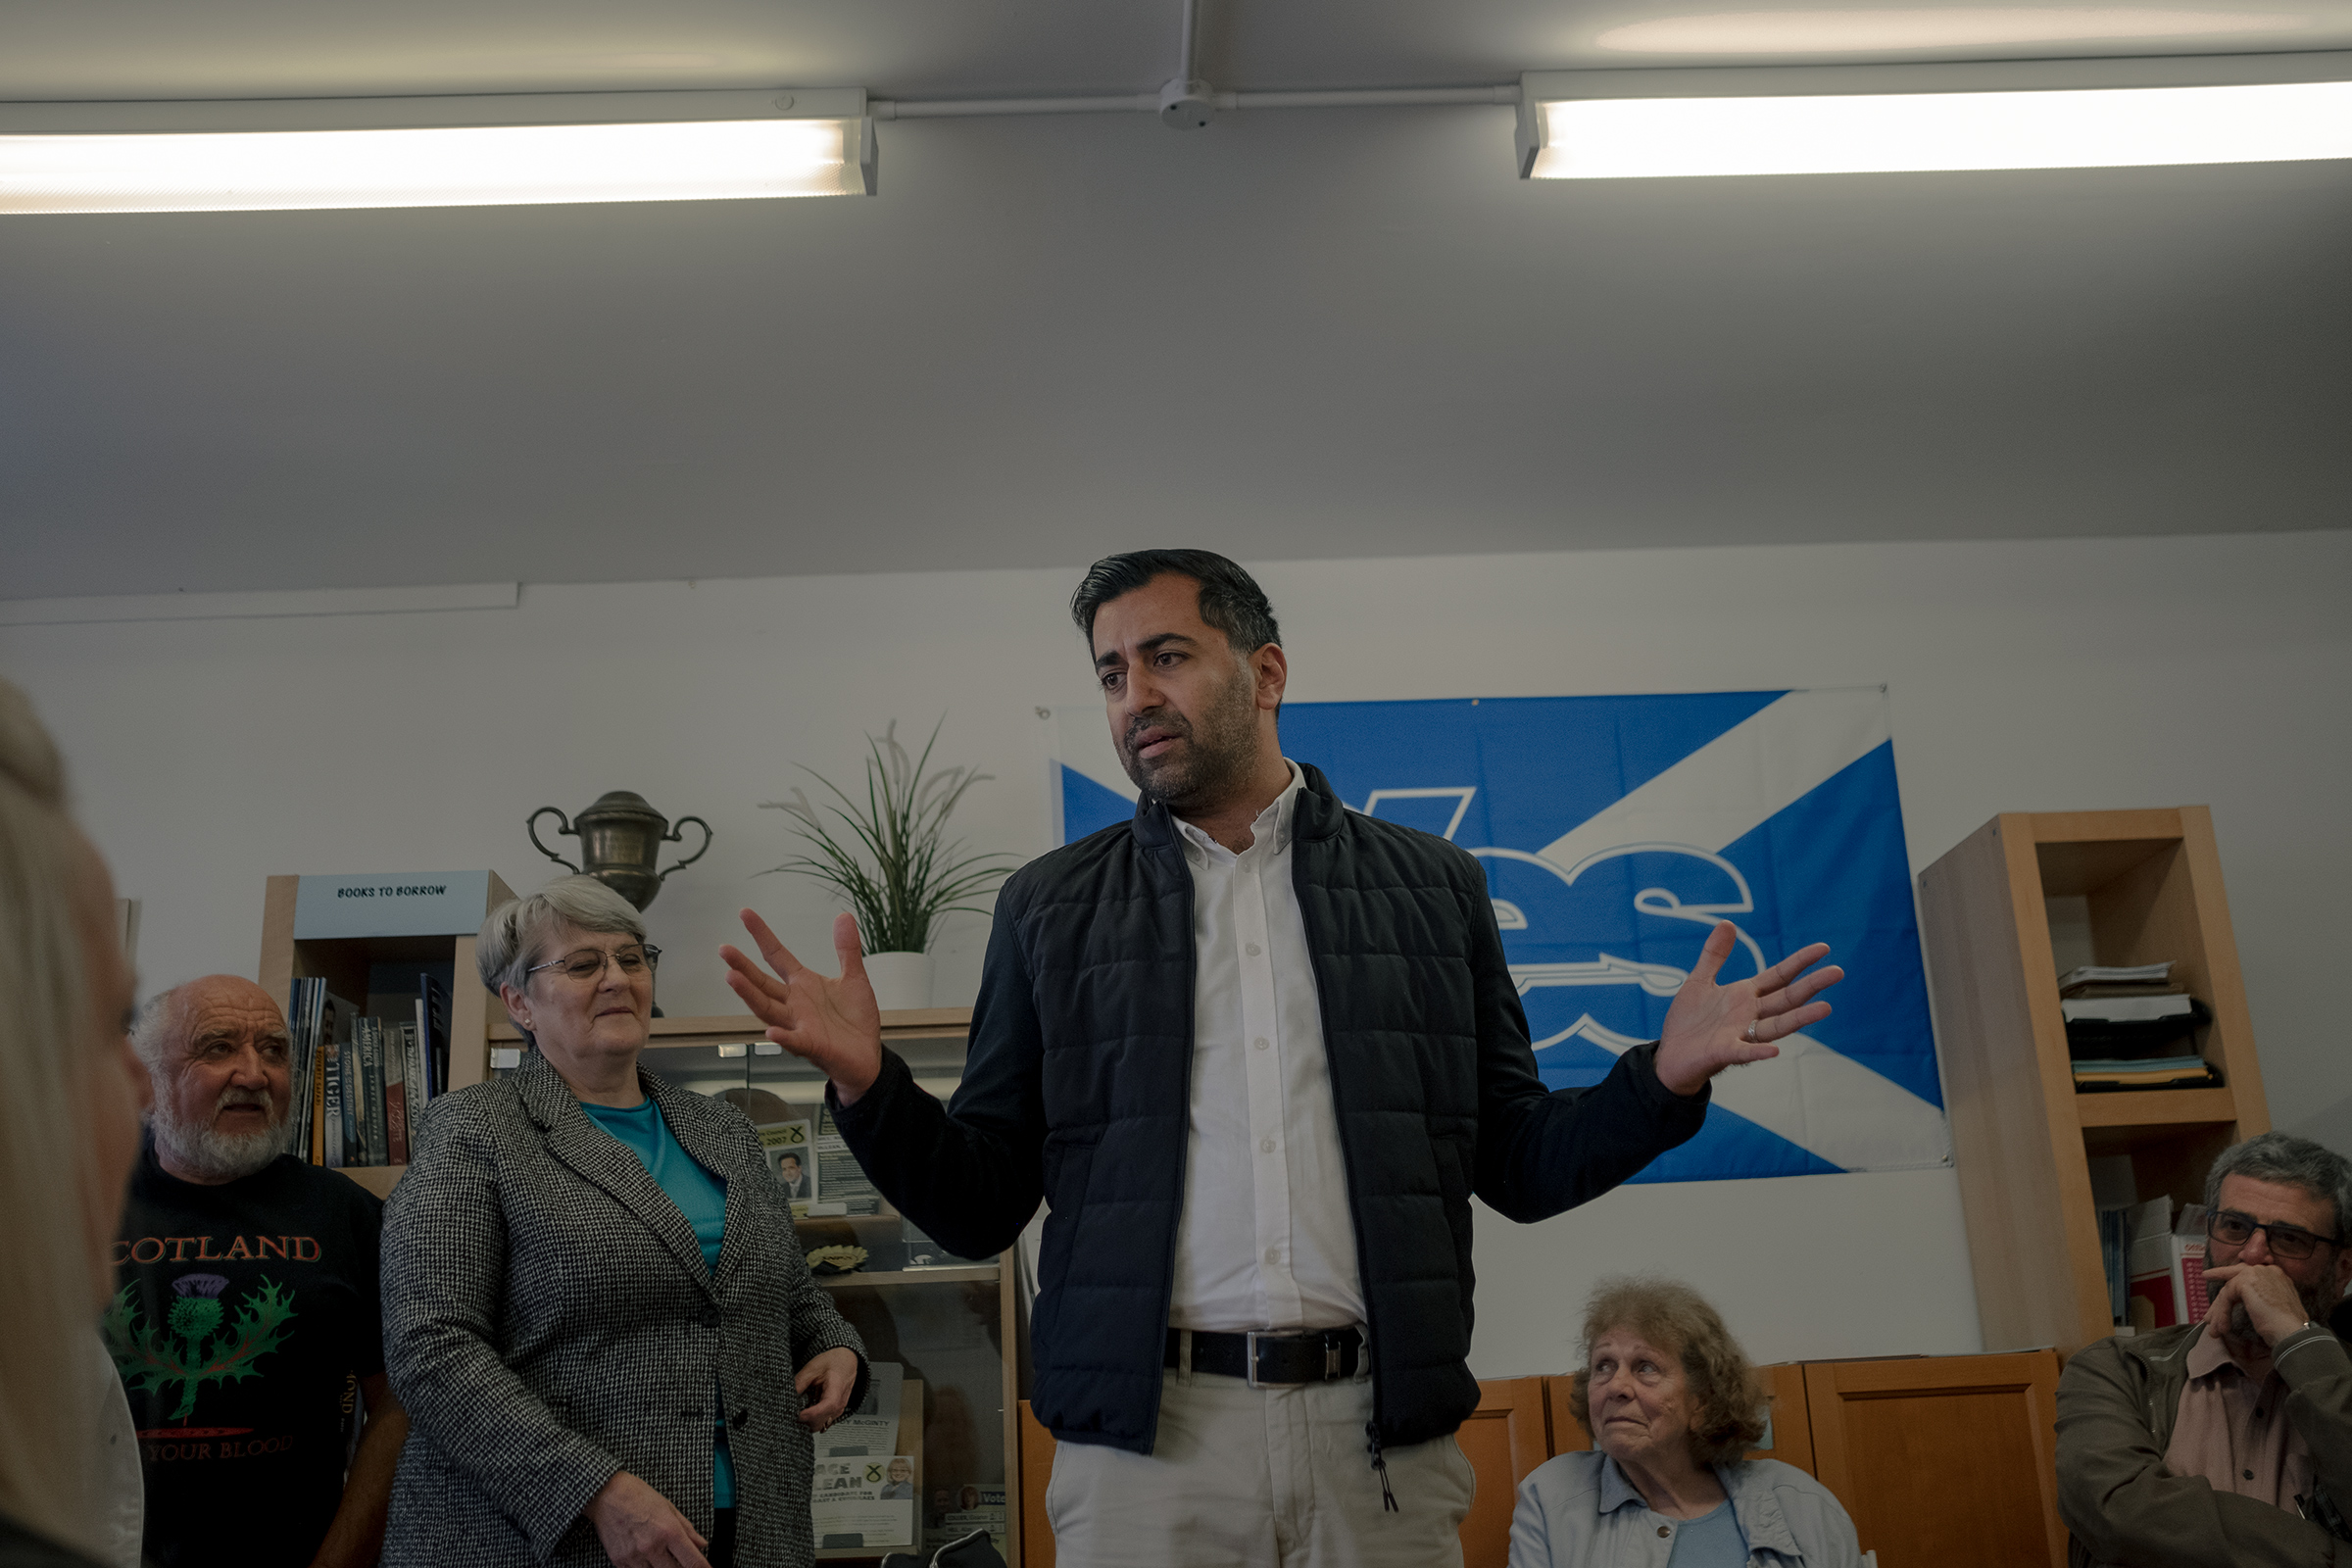 Yousaf speaks to supporters at the SNP office in Largs, Scotland, on Aug. 23. (Gabriella Demczuk for TIME)